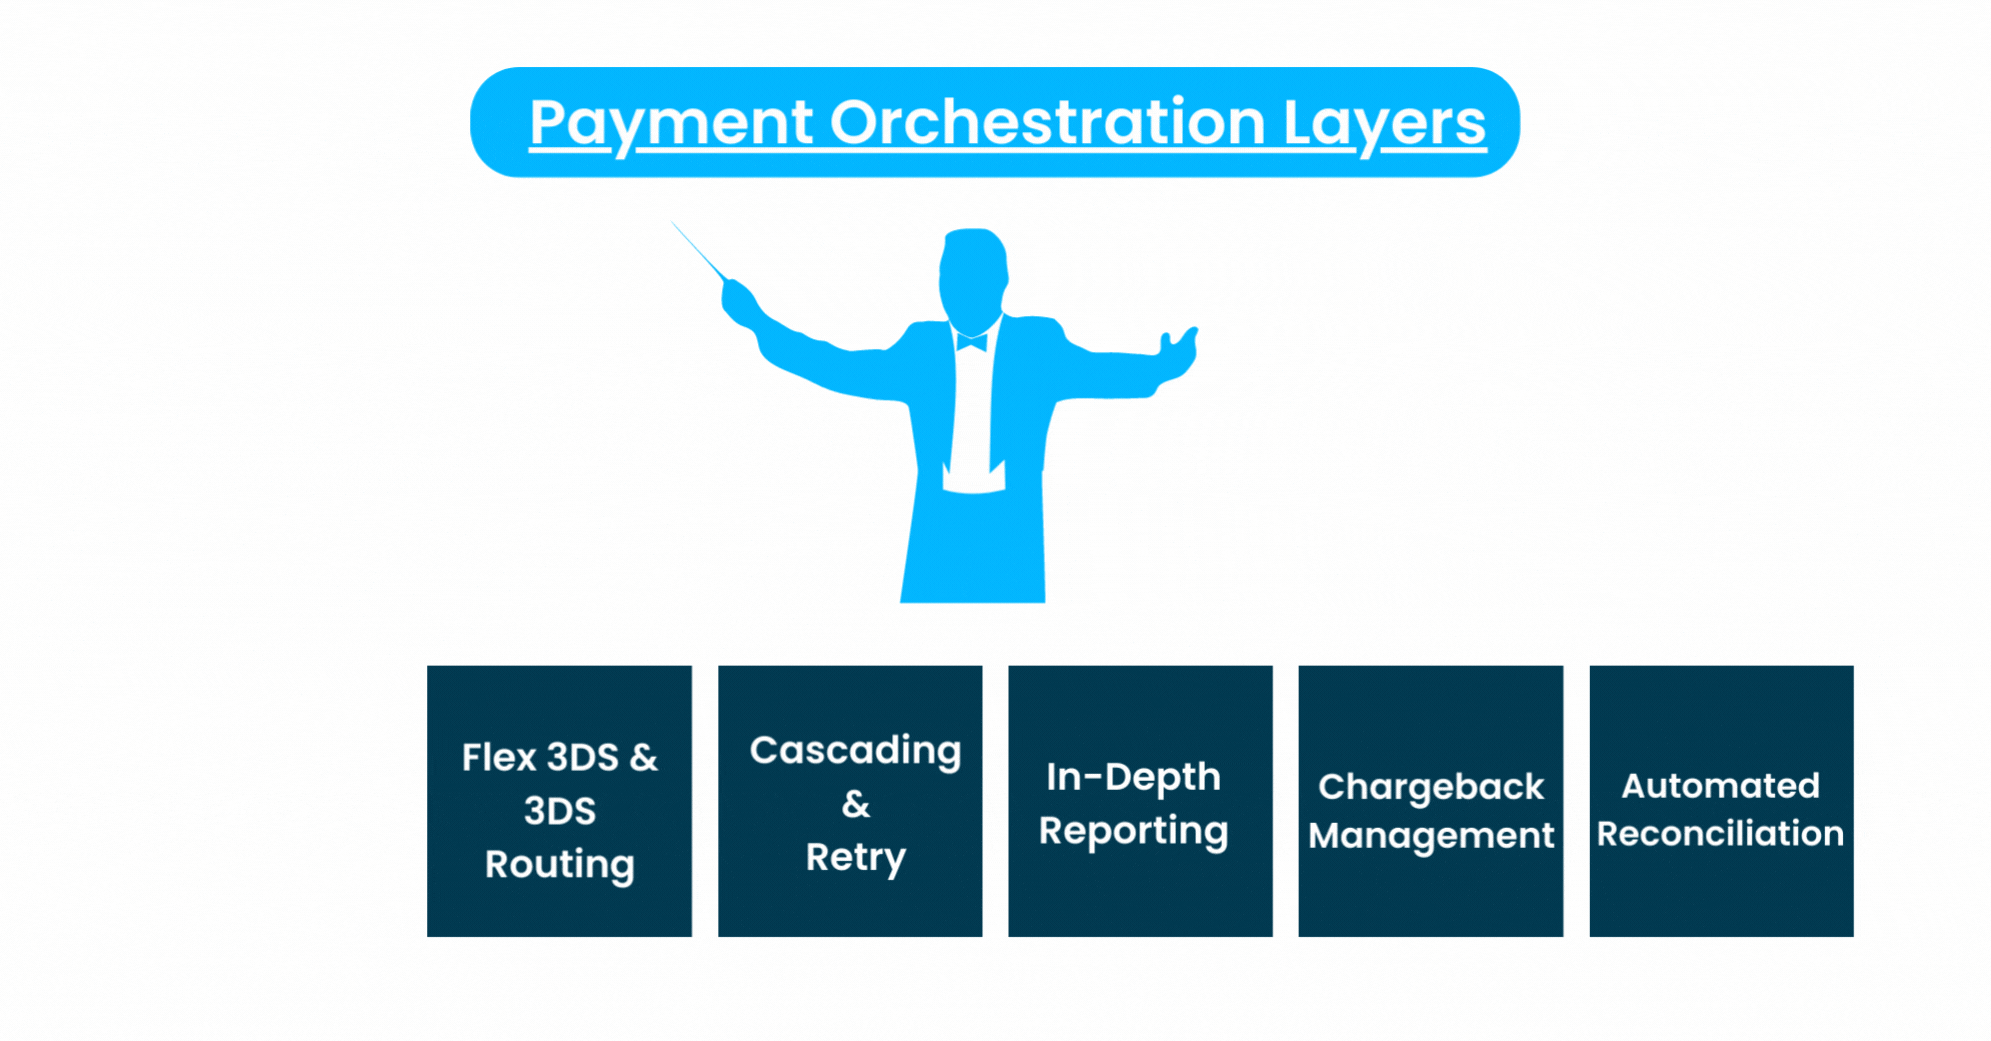 Payment Orchestration